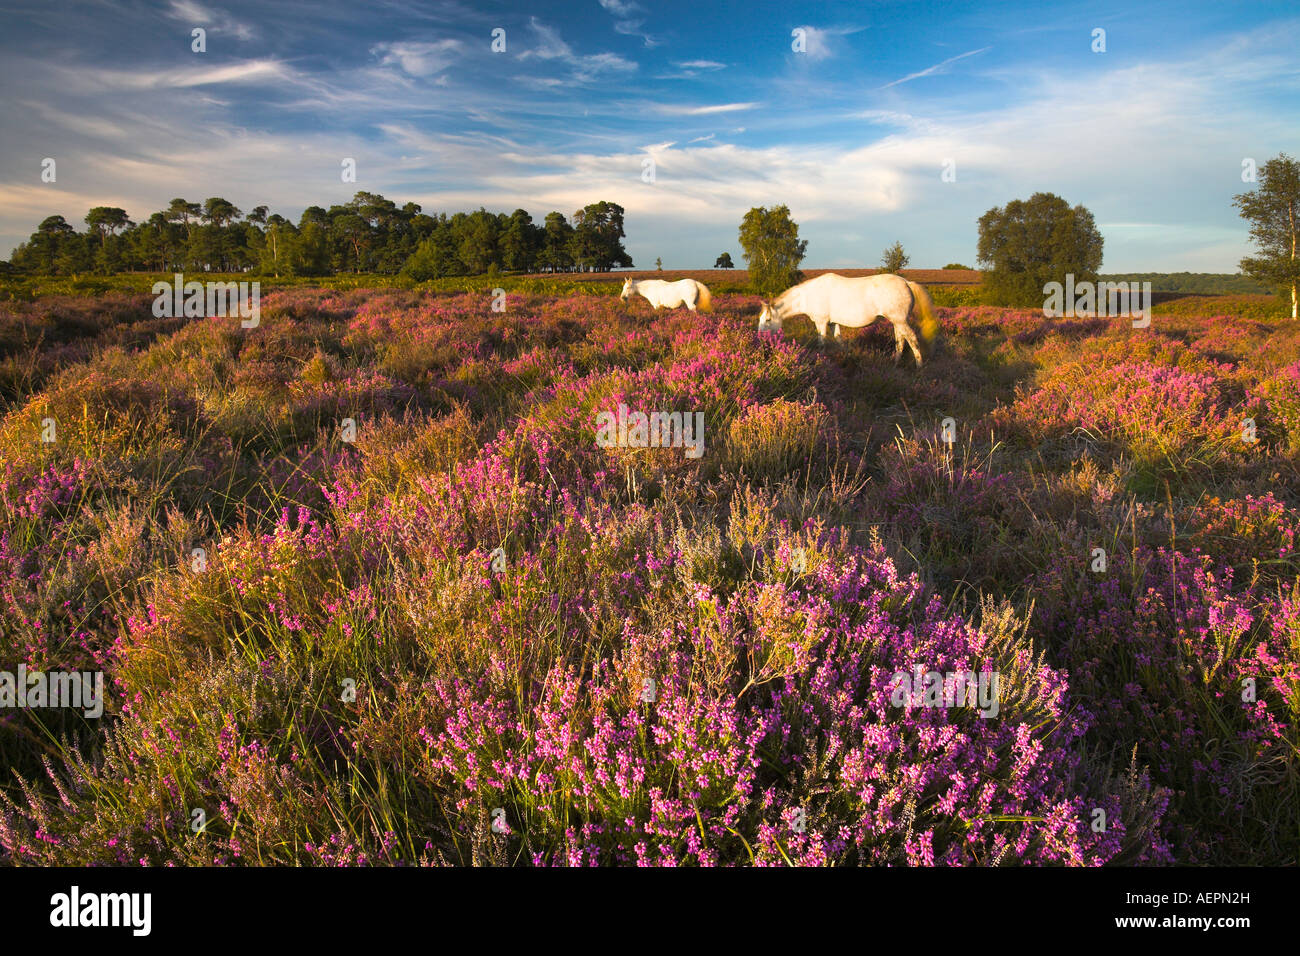 New Forest pony pascolare tra le eriche, New Forest National Park Foto Stock